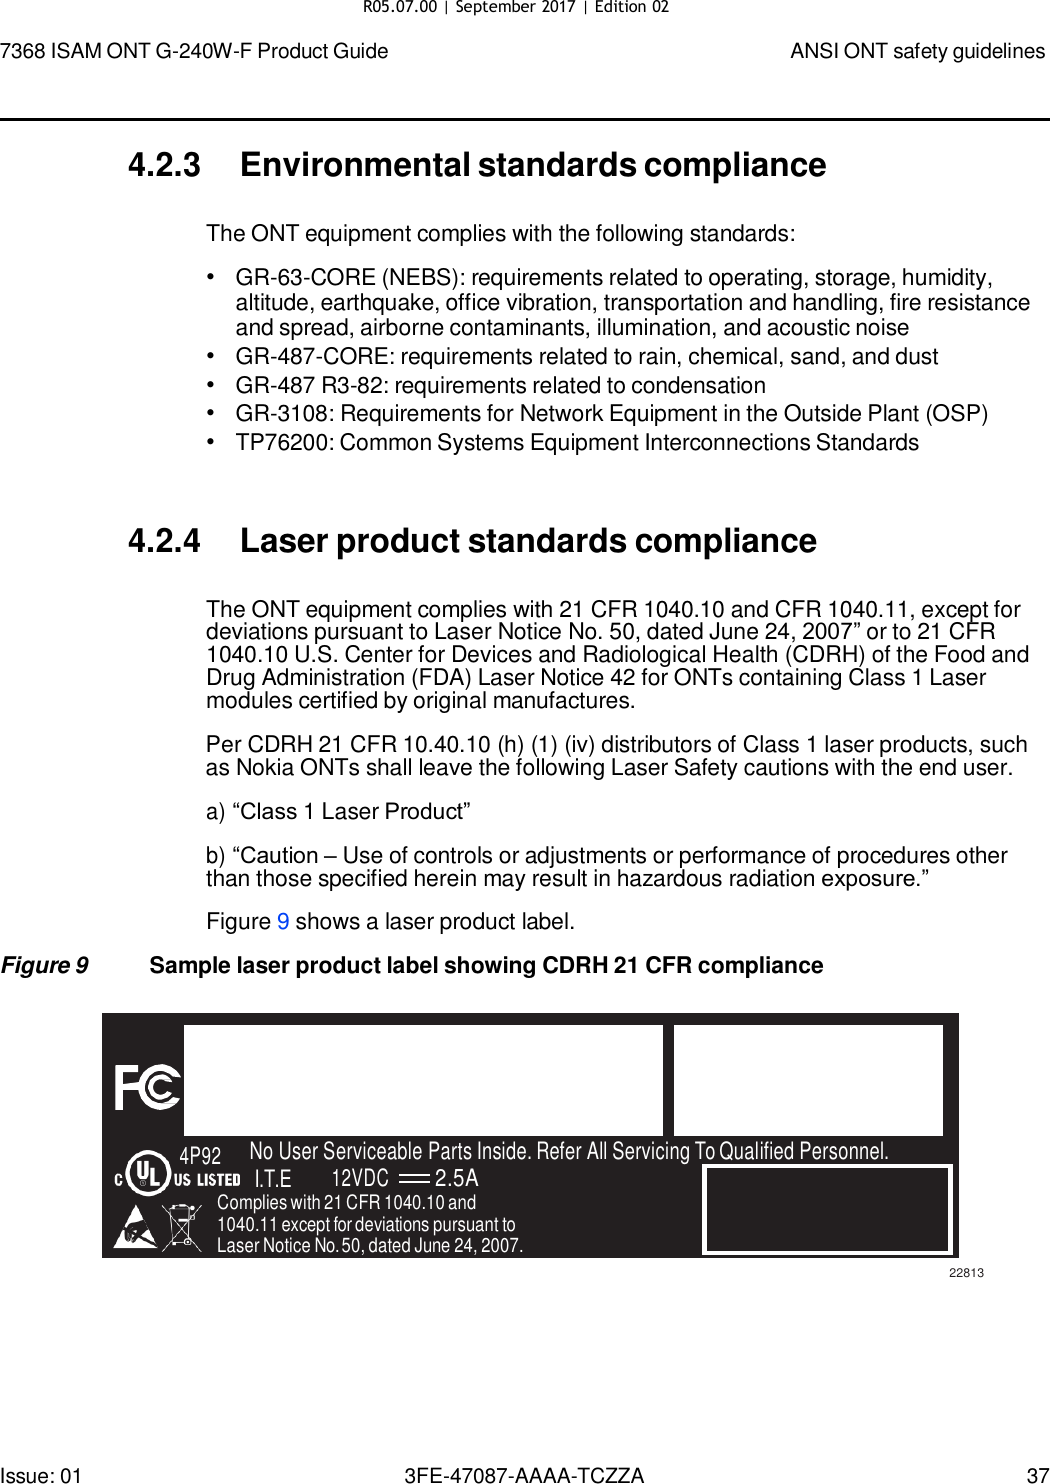 Page 34 of Nokia Bell G240WFV2 7368 ISAM GPON ONU User Manual 7368 ISAM ONT G 240W F Product Guide